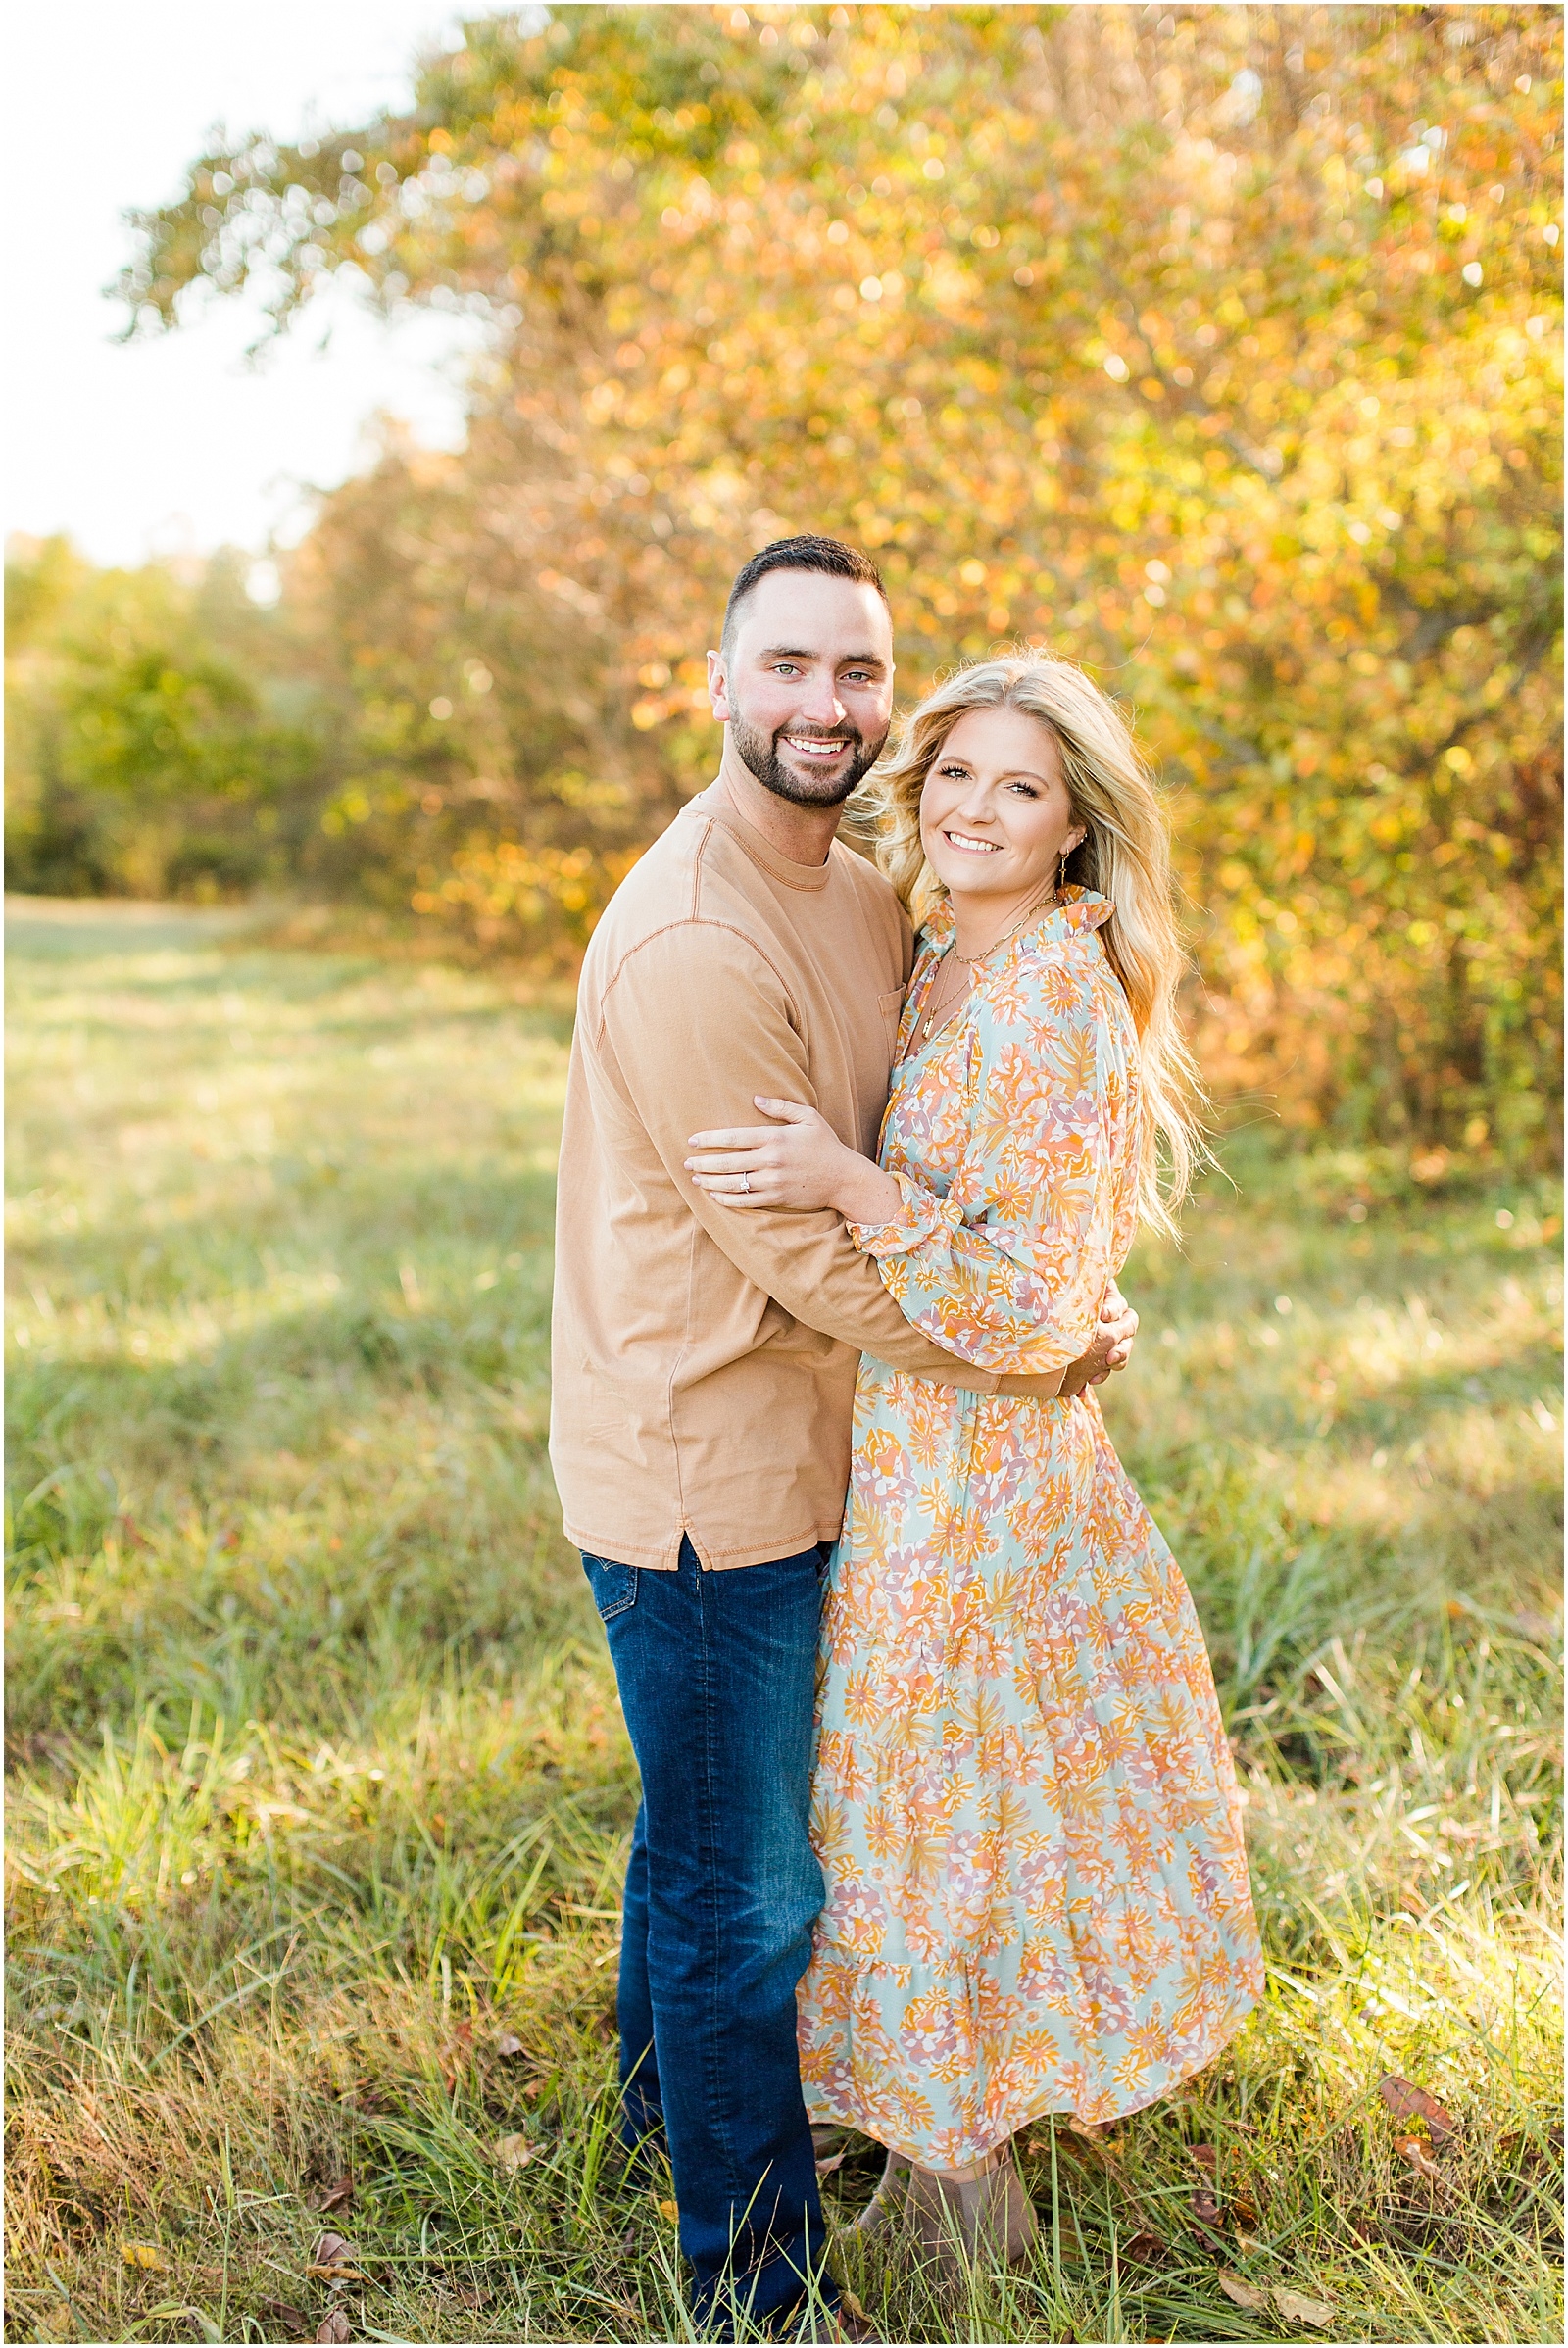 A Southern Indiana Engagement Session | Charleston and Erin | Bret and Brandie Photography001.jpg